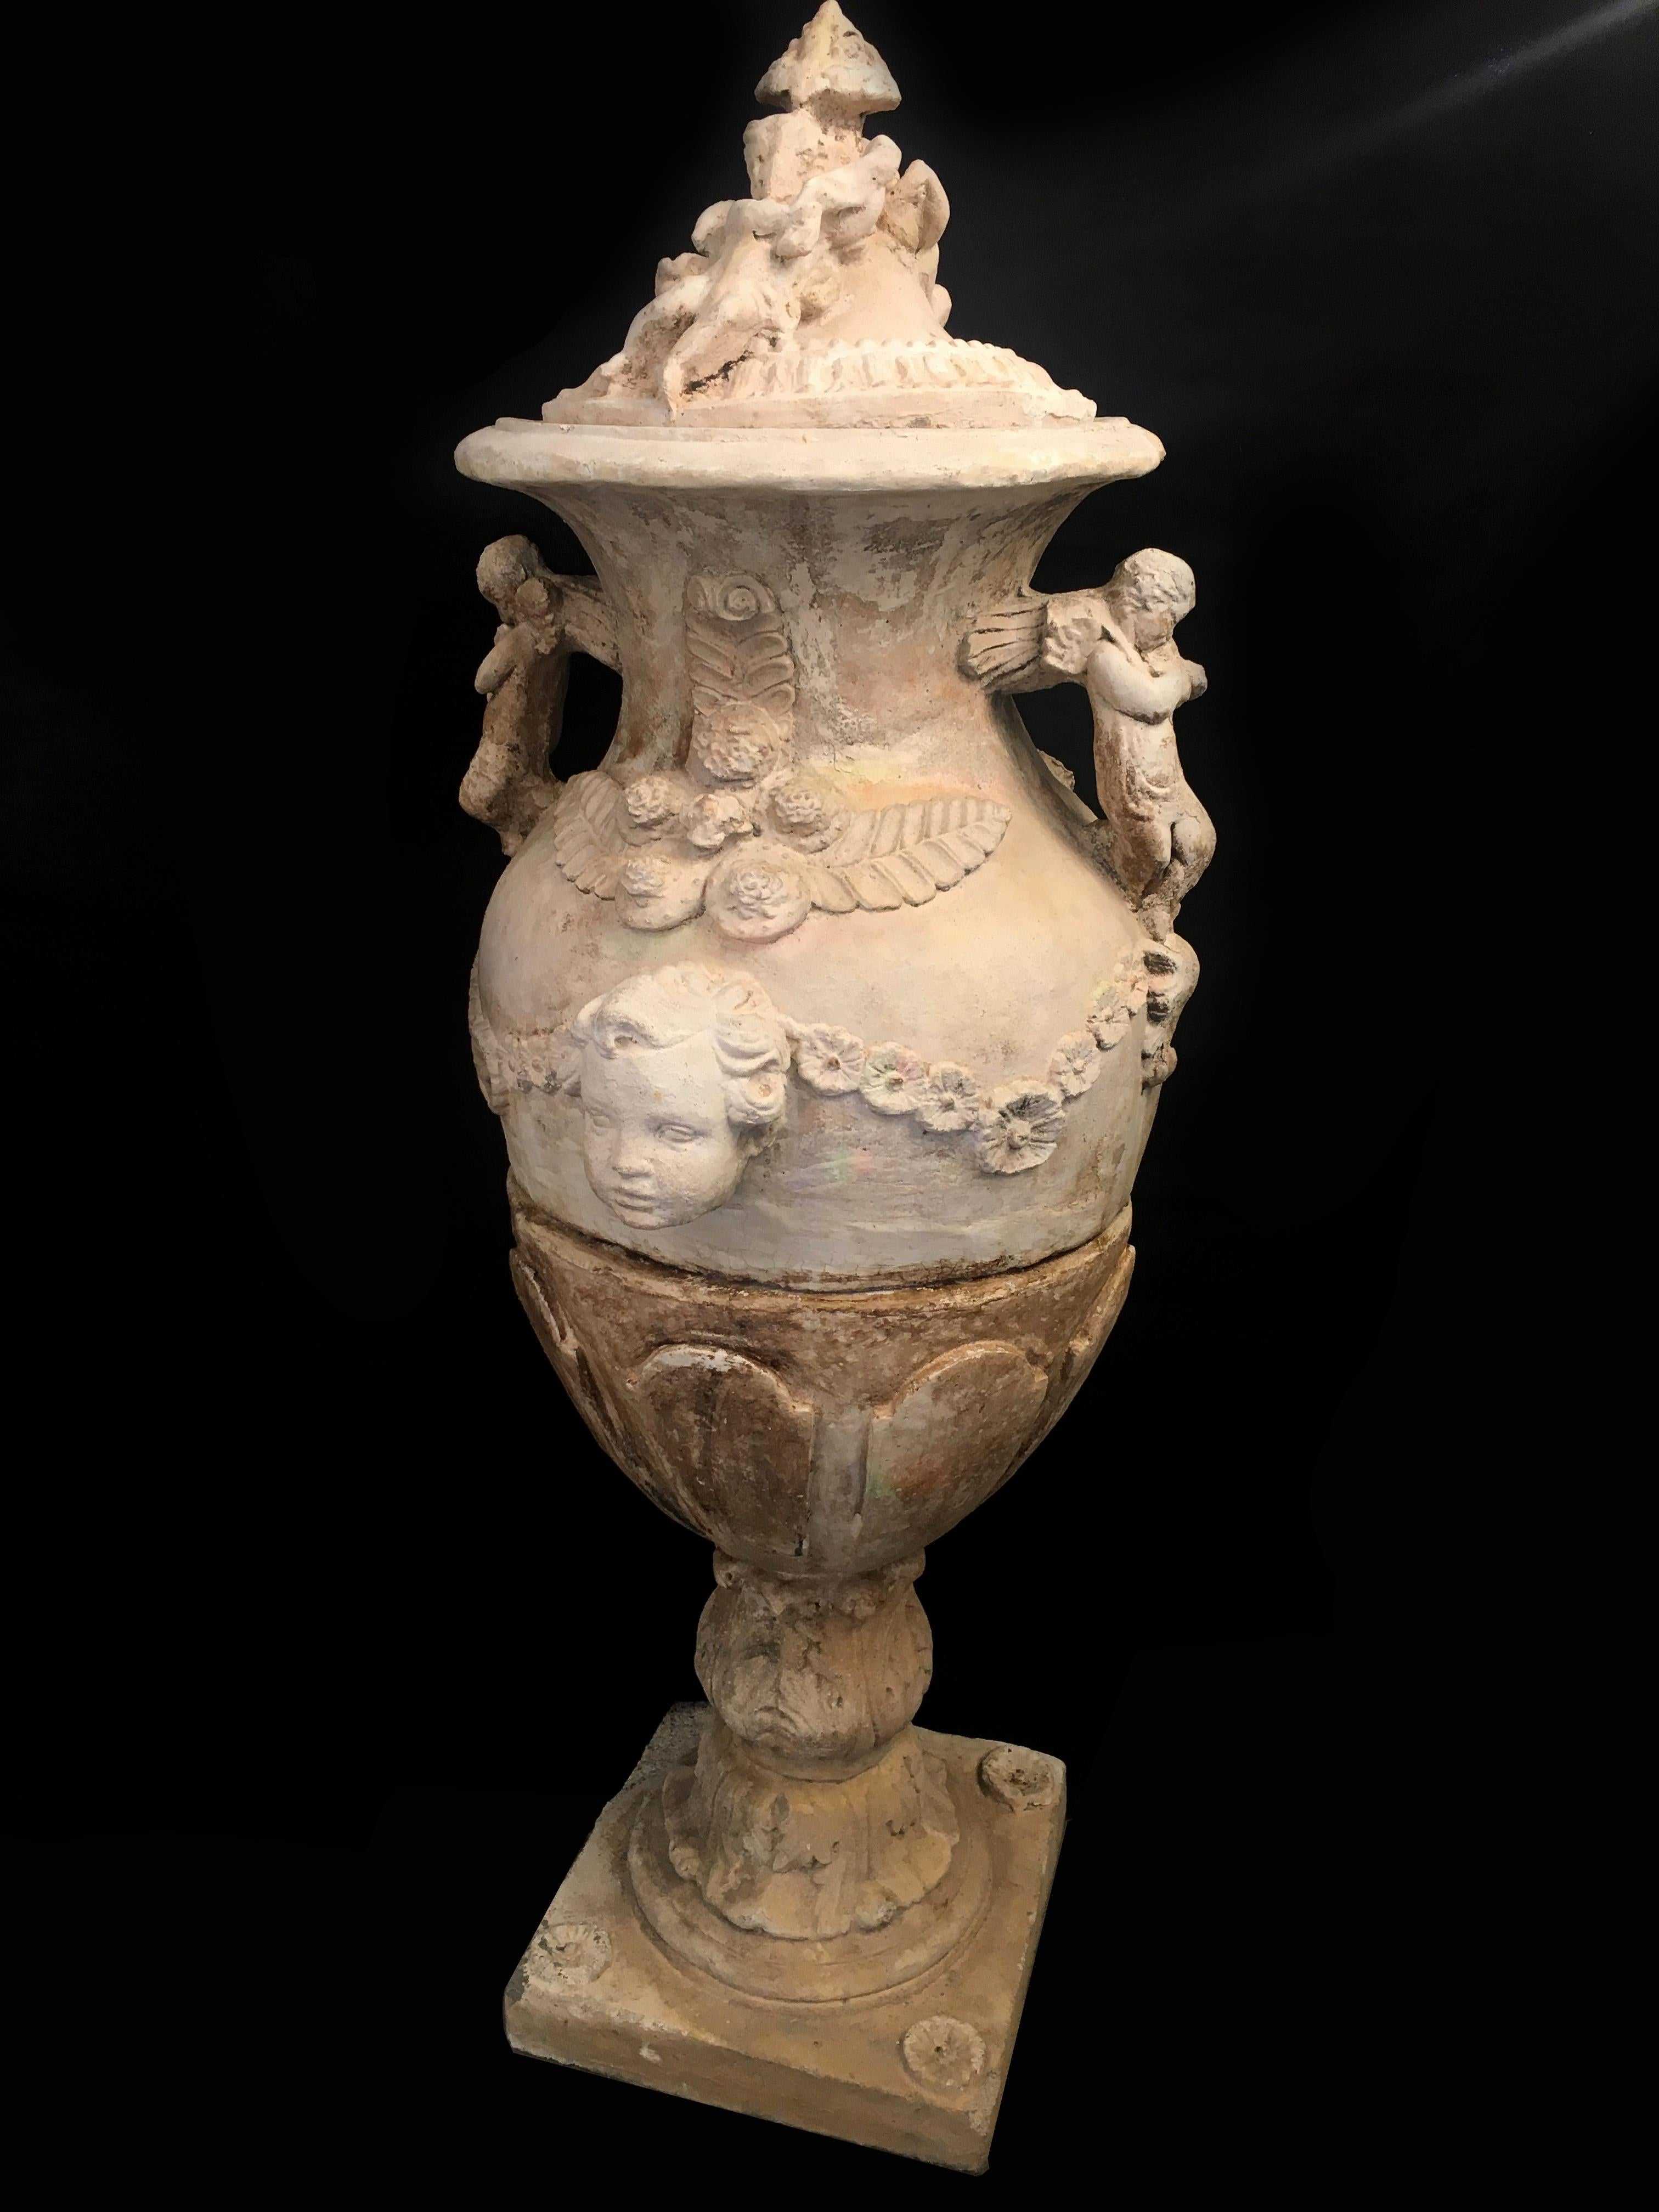 Extraordinary pair of vases dating back to the late 1700s and coming from a villa on the hills of Fiesole (Florence).